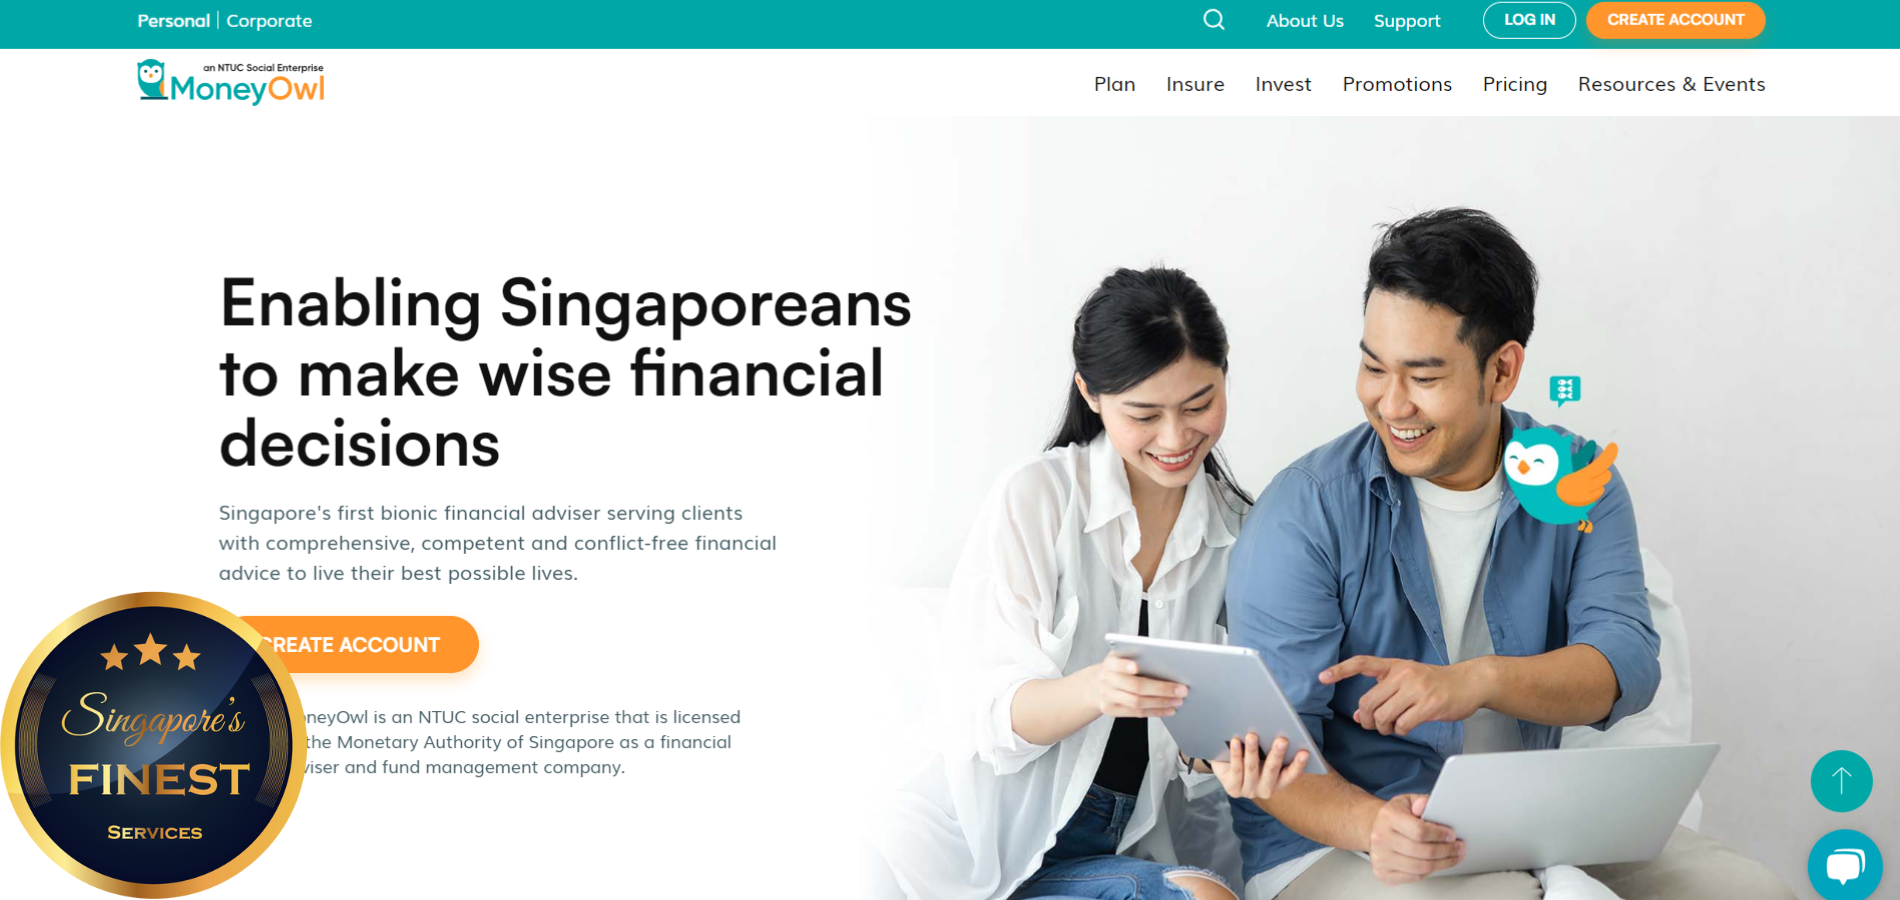 The Finest Retirement Planning in Singapore